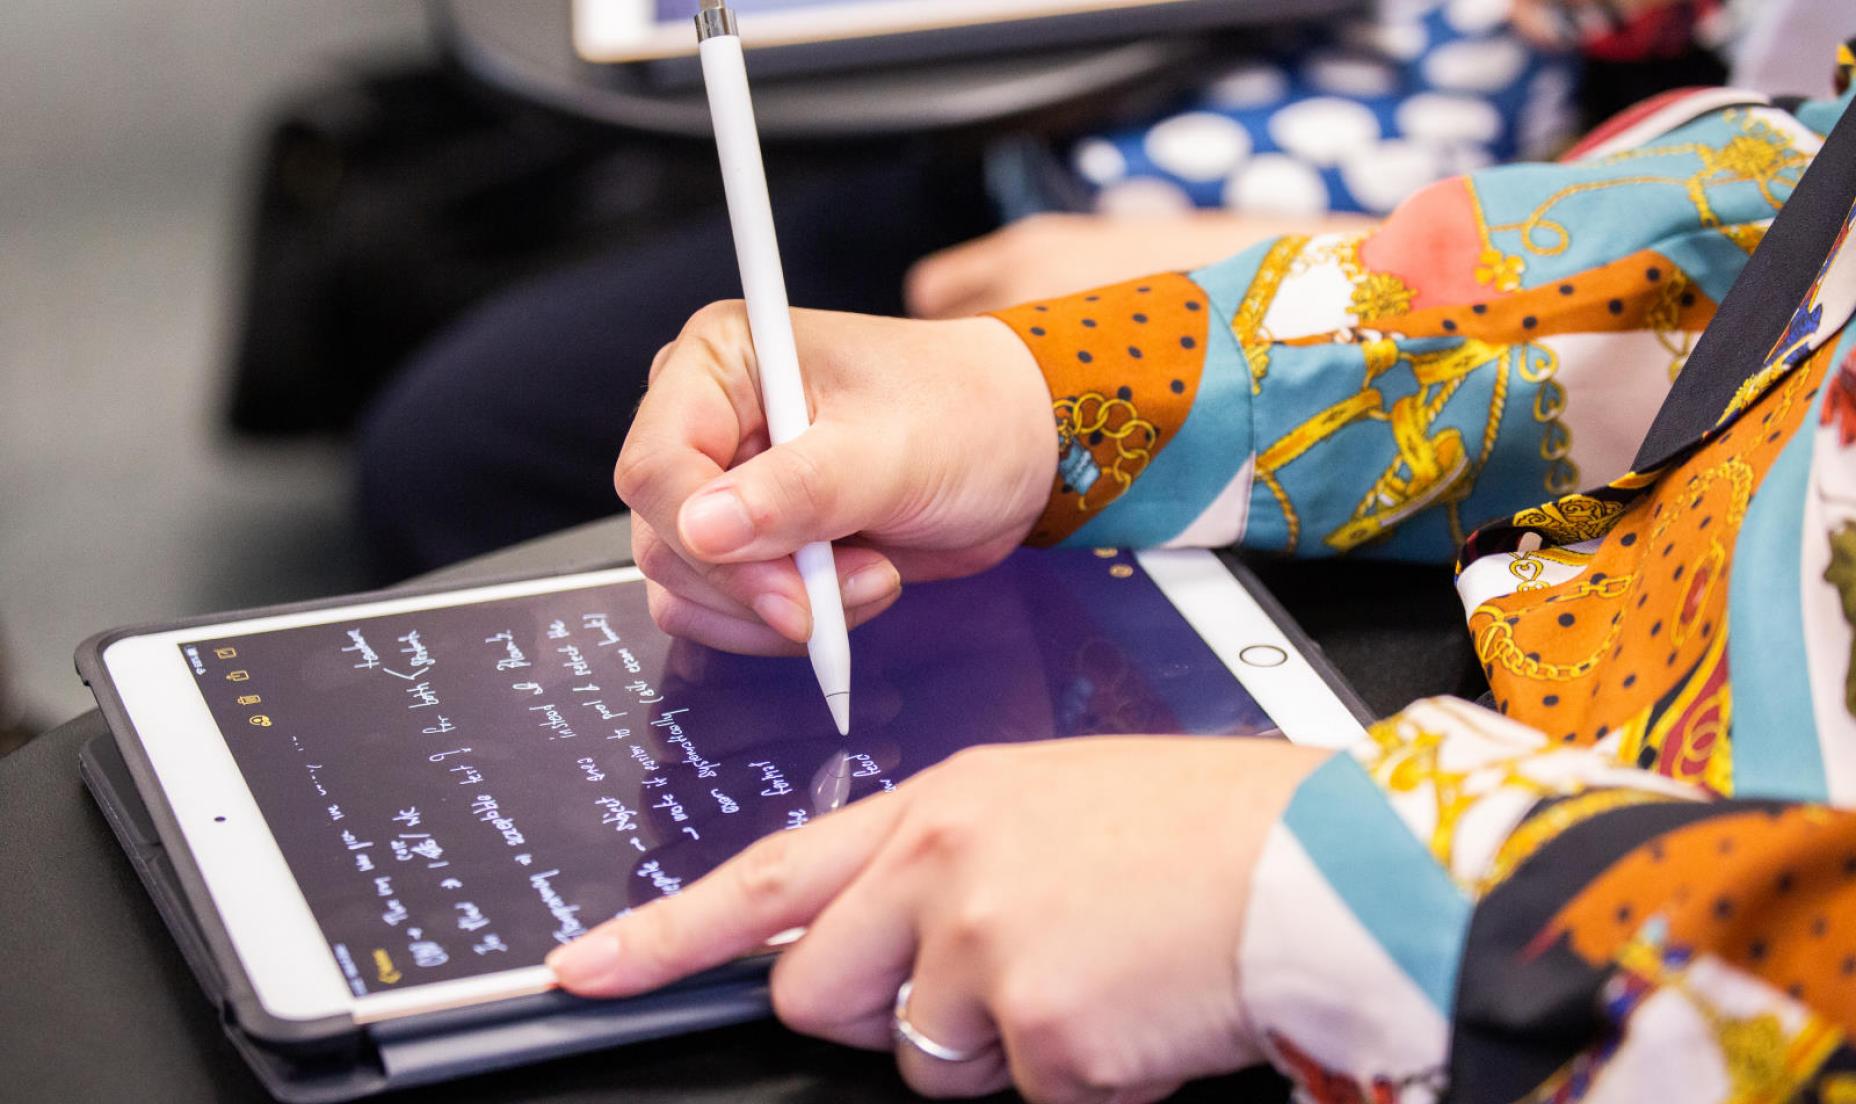 A person writes on an electric tablet with a stylus pen